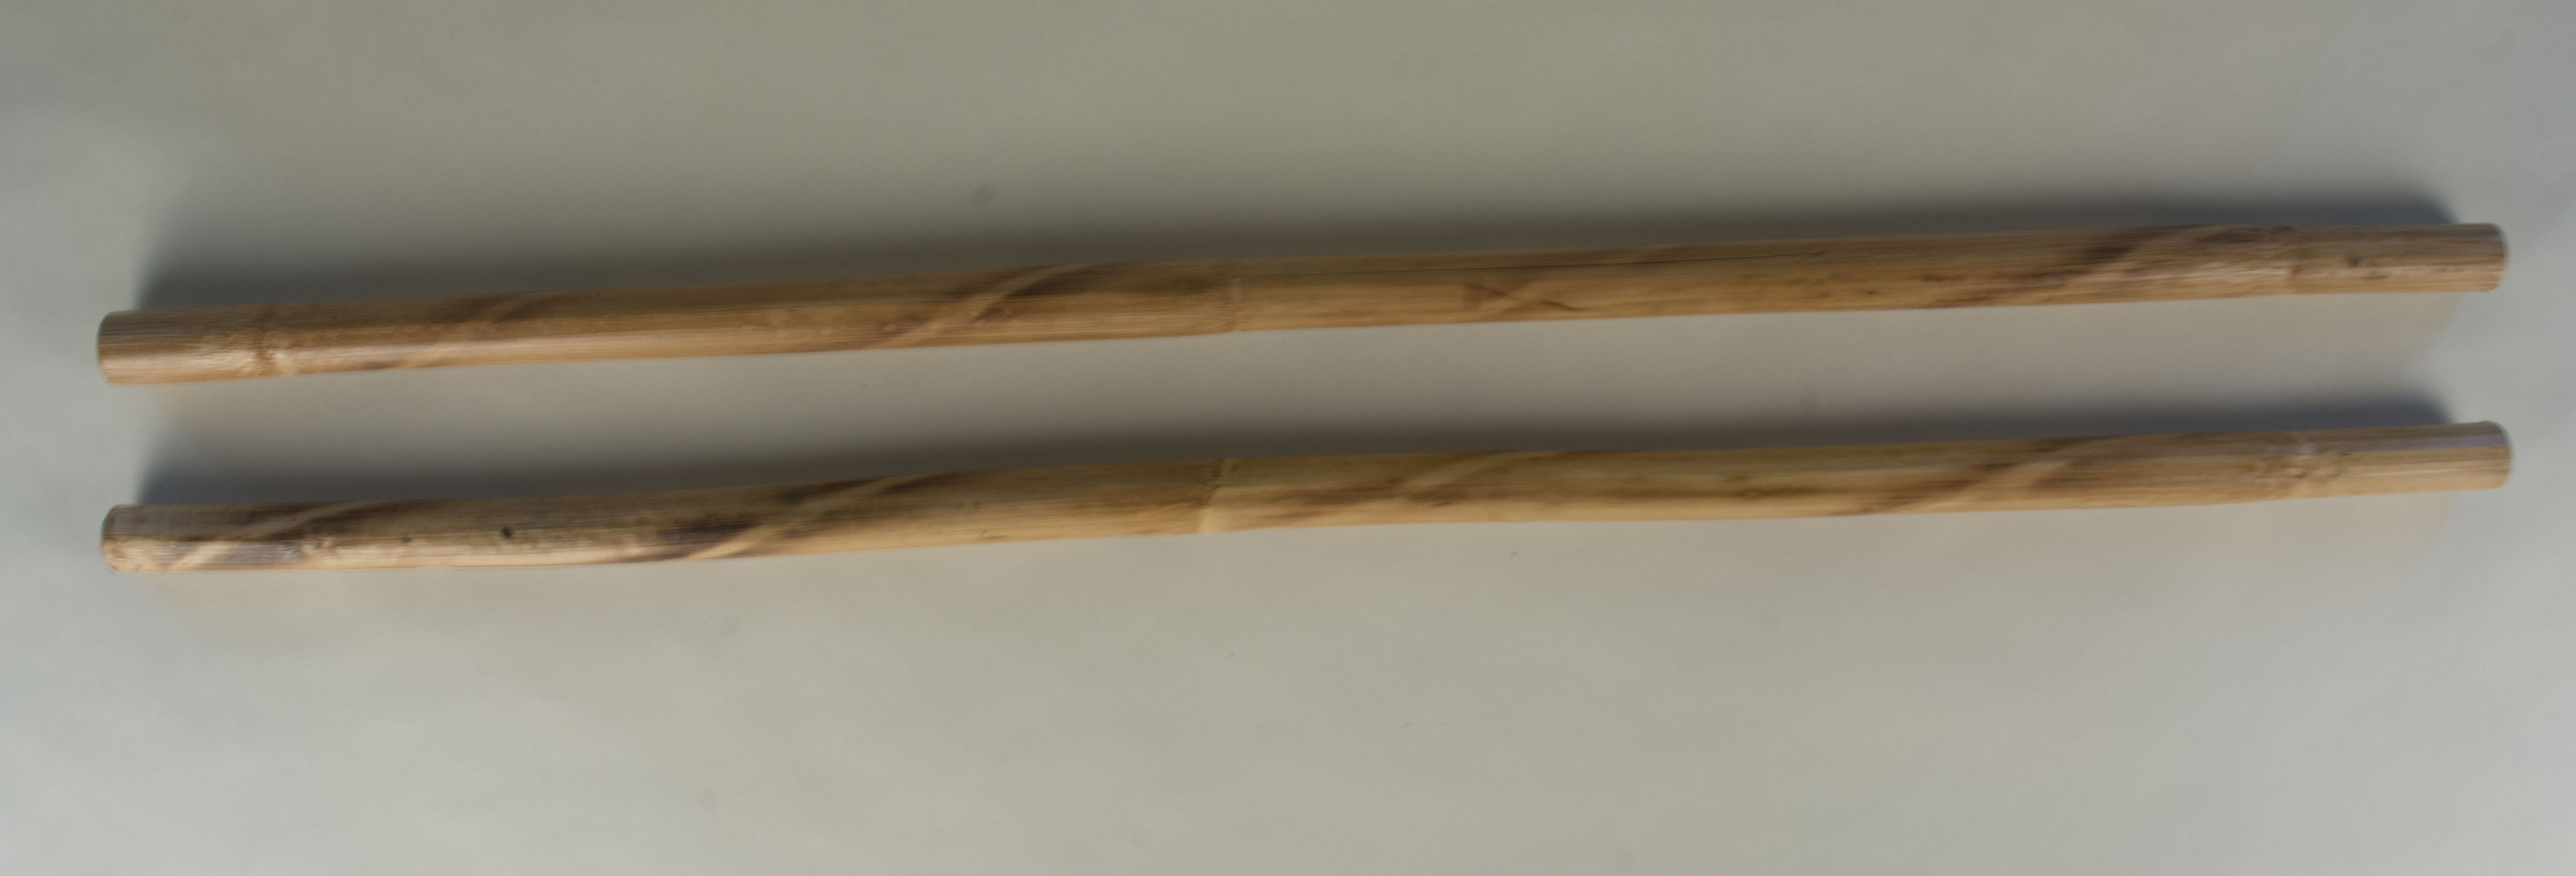 Kali sticks owned by Virginia B. Capulong- front view. Acquired in 2008 from small vendor in Vigan. Rhodessa noted that she is very interested in kali as combat/martial art. She finds the movements graceful. Any views, findings, conclusions, or recommendations expressed in this story do not necessarily represent those of the National Endowment for the Humanities. (c) Field Museum of Natural History - CC BY-NC 4.0